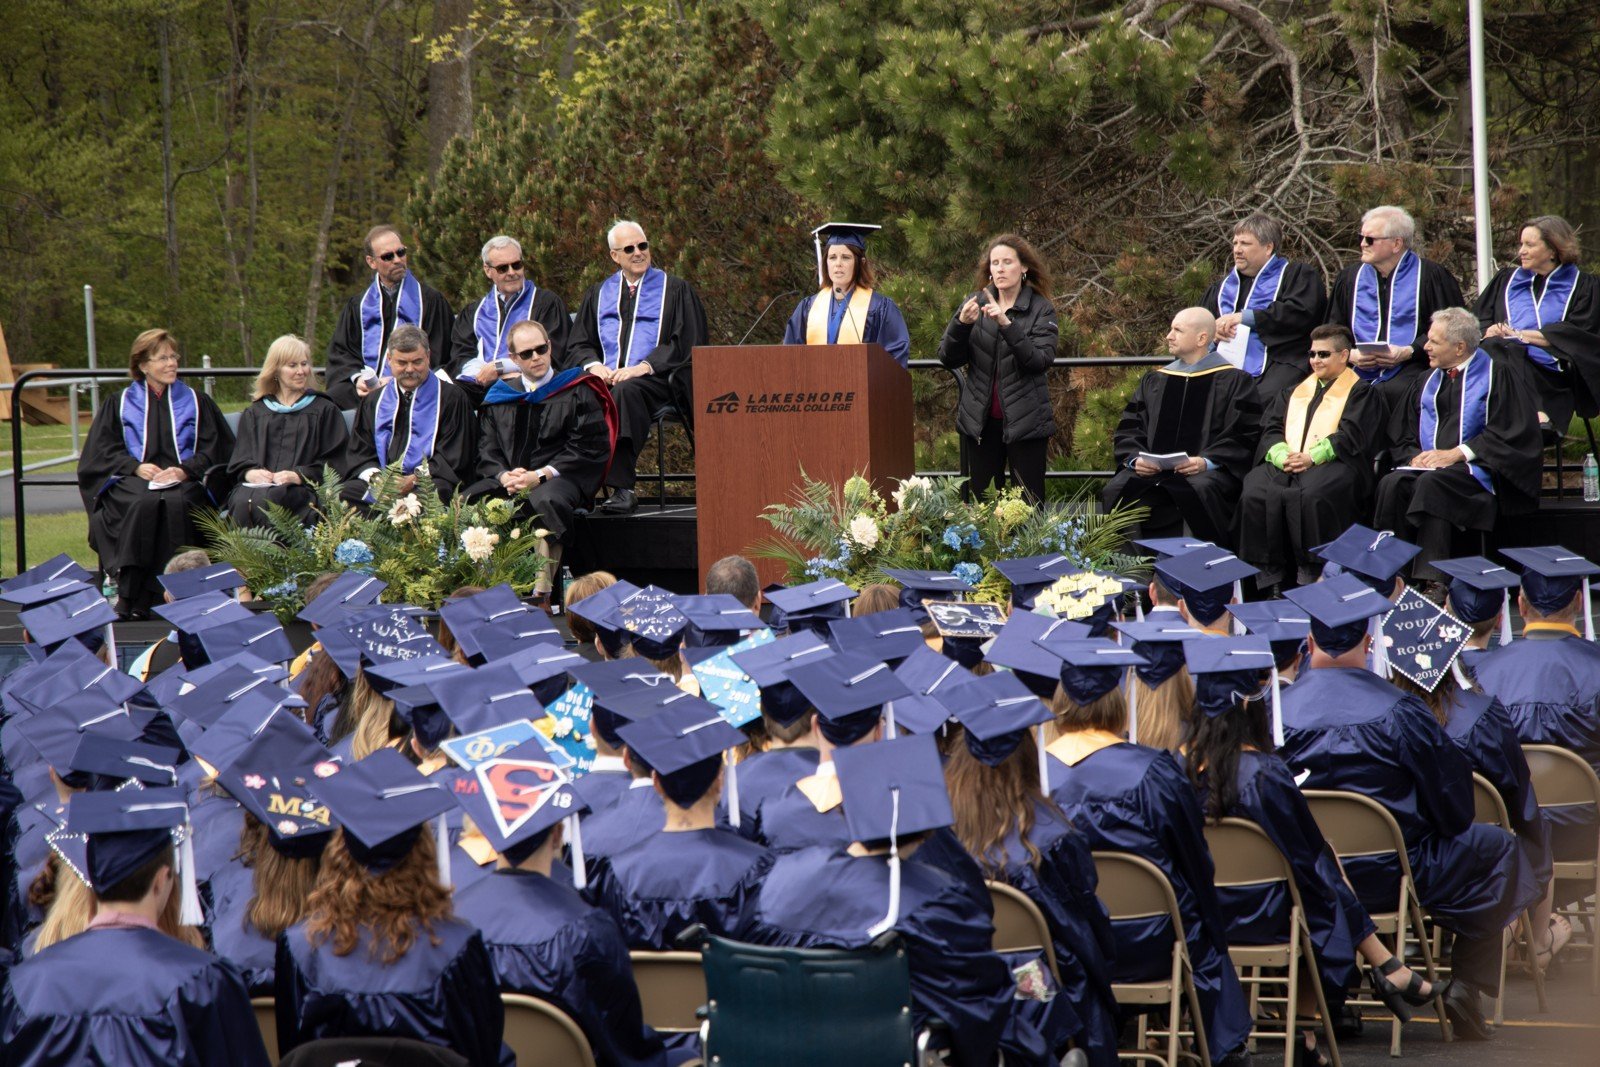 LTC Commencement Student Speaker Michelle Sanders addresses fellow graduates during the ceremony on May 19.